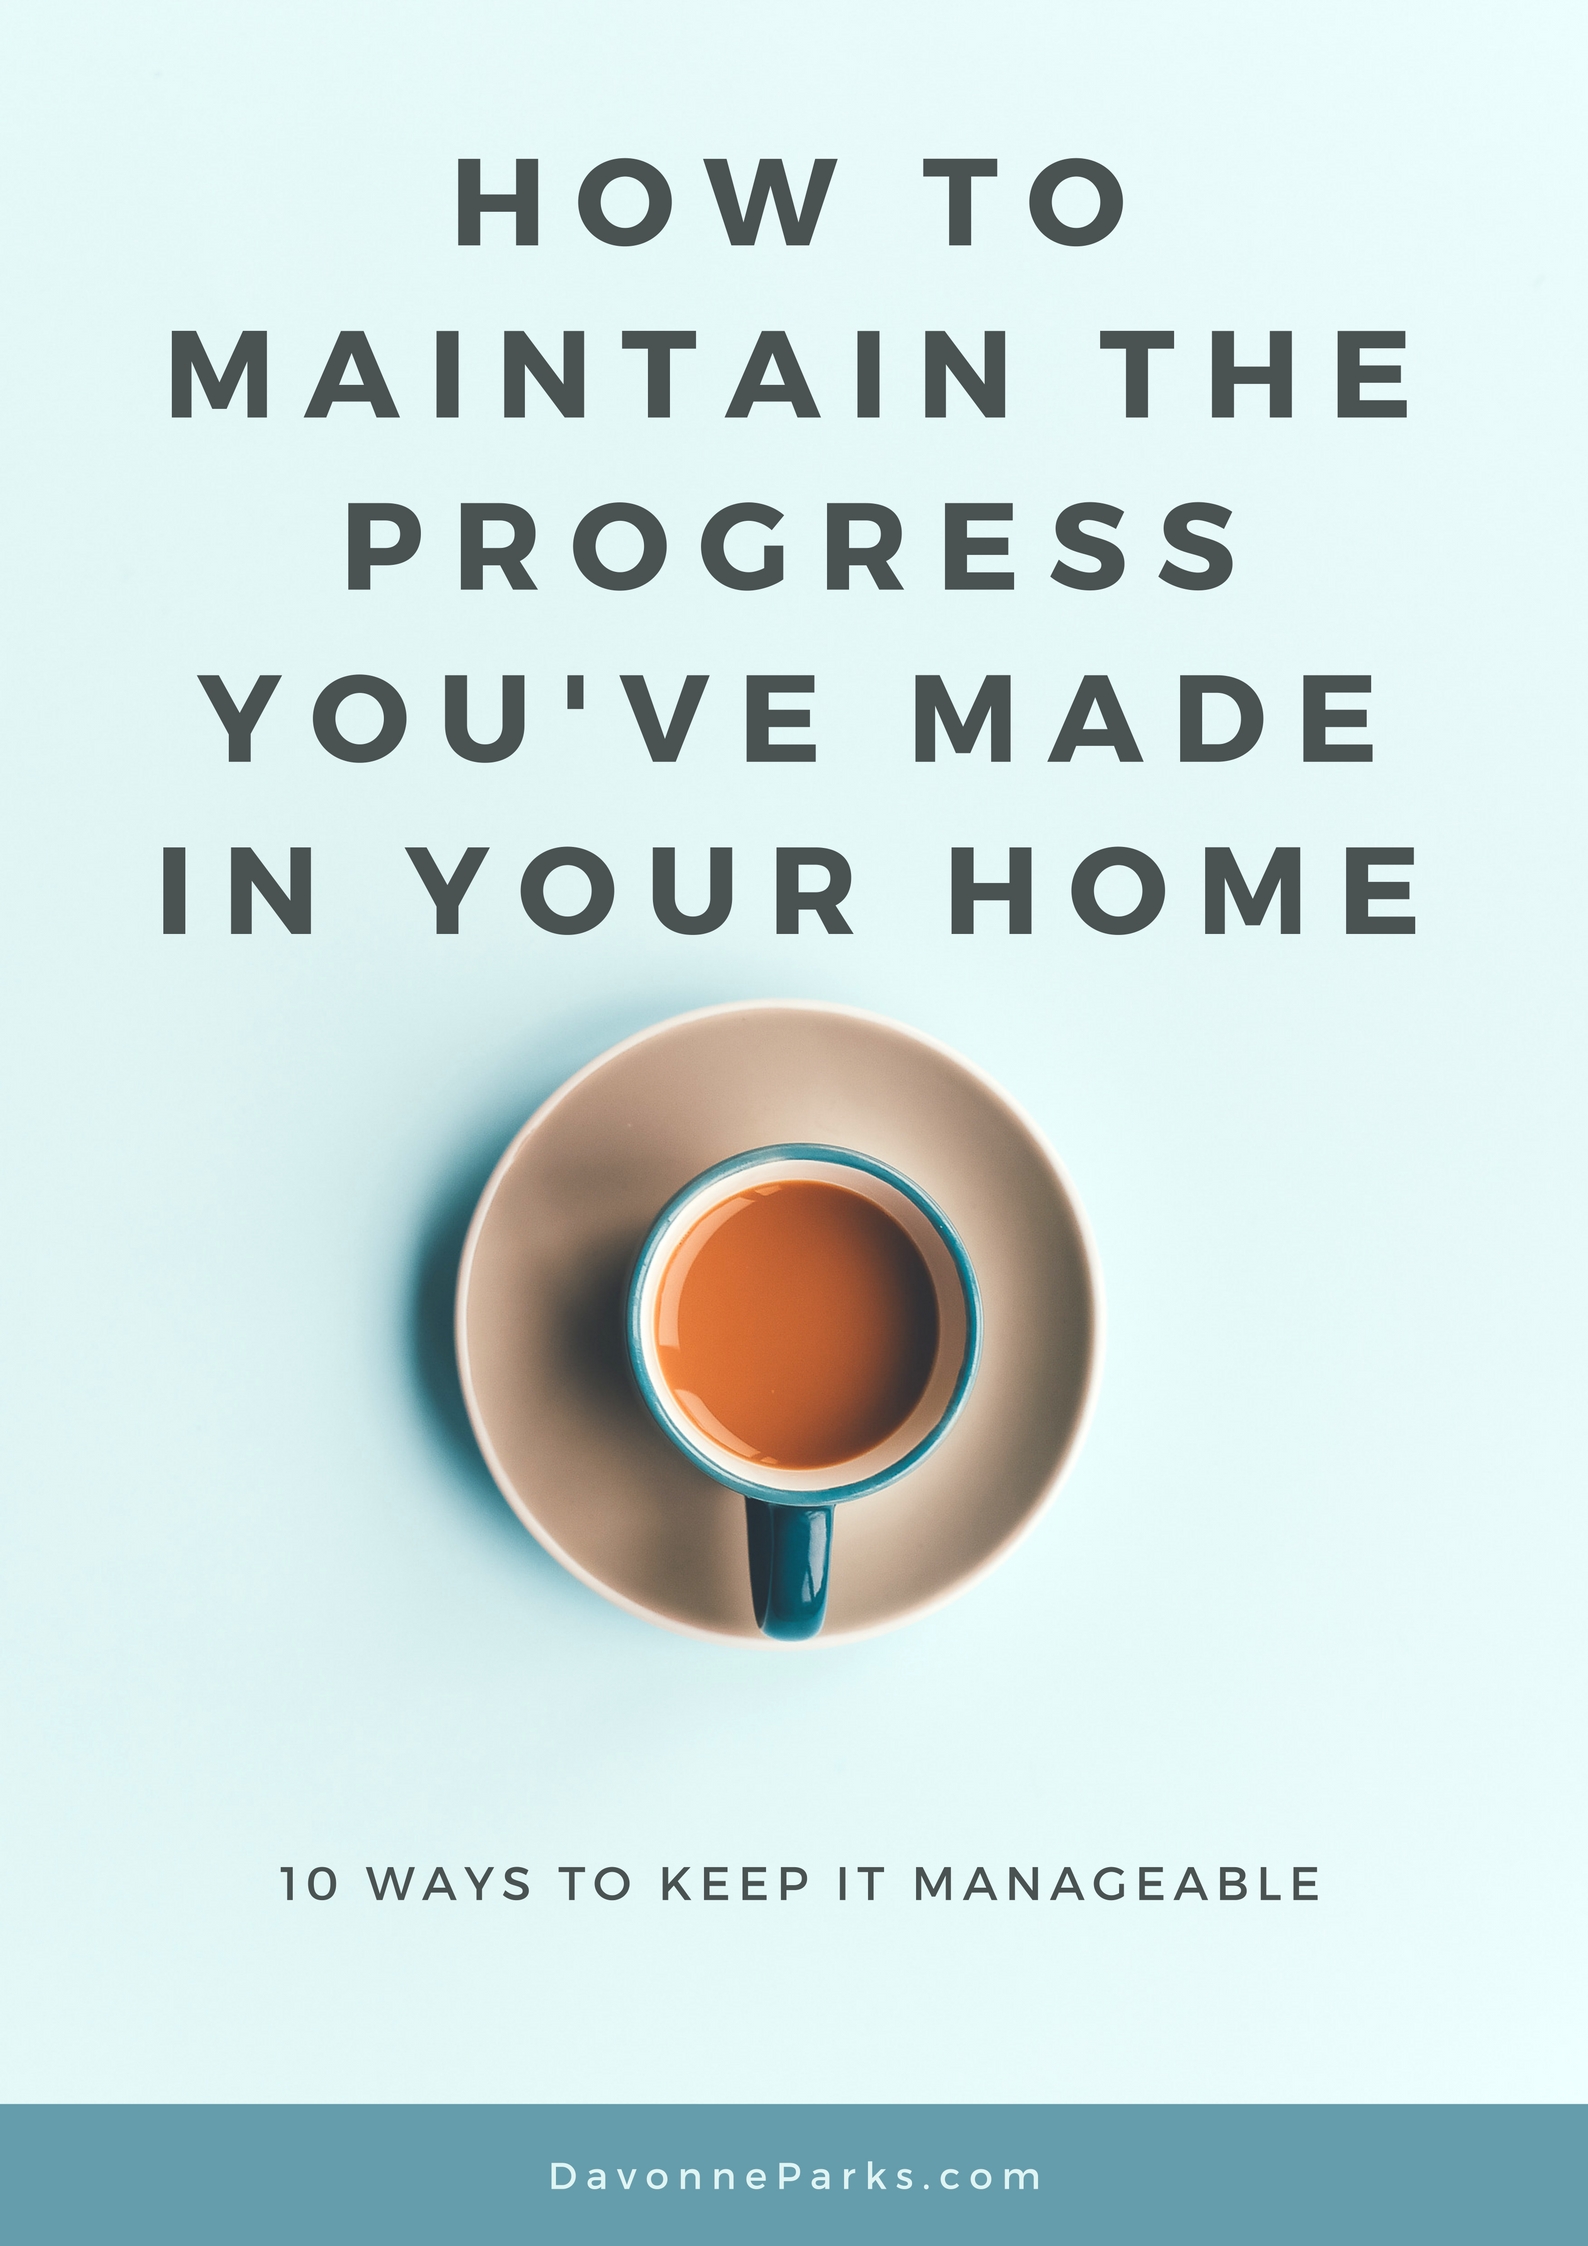 How to Maintain the Progress You’ve Made in Your Home